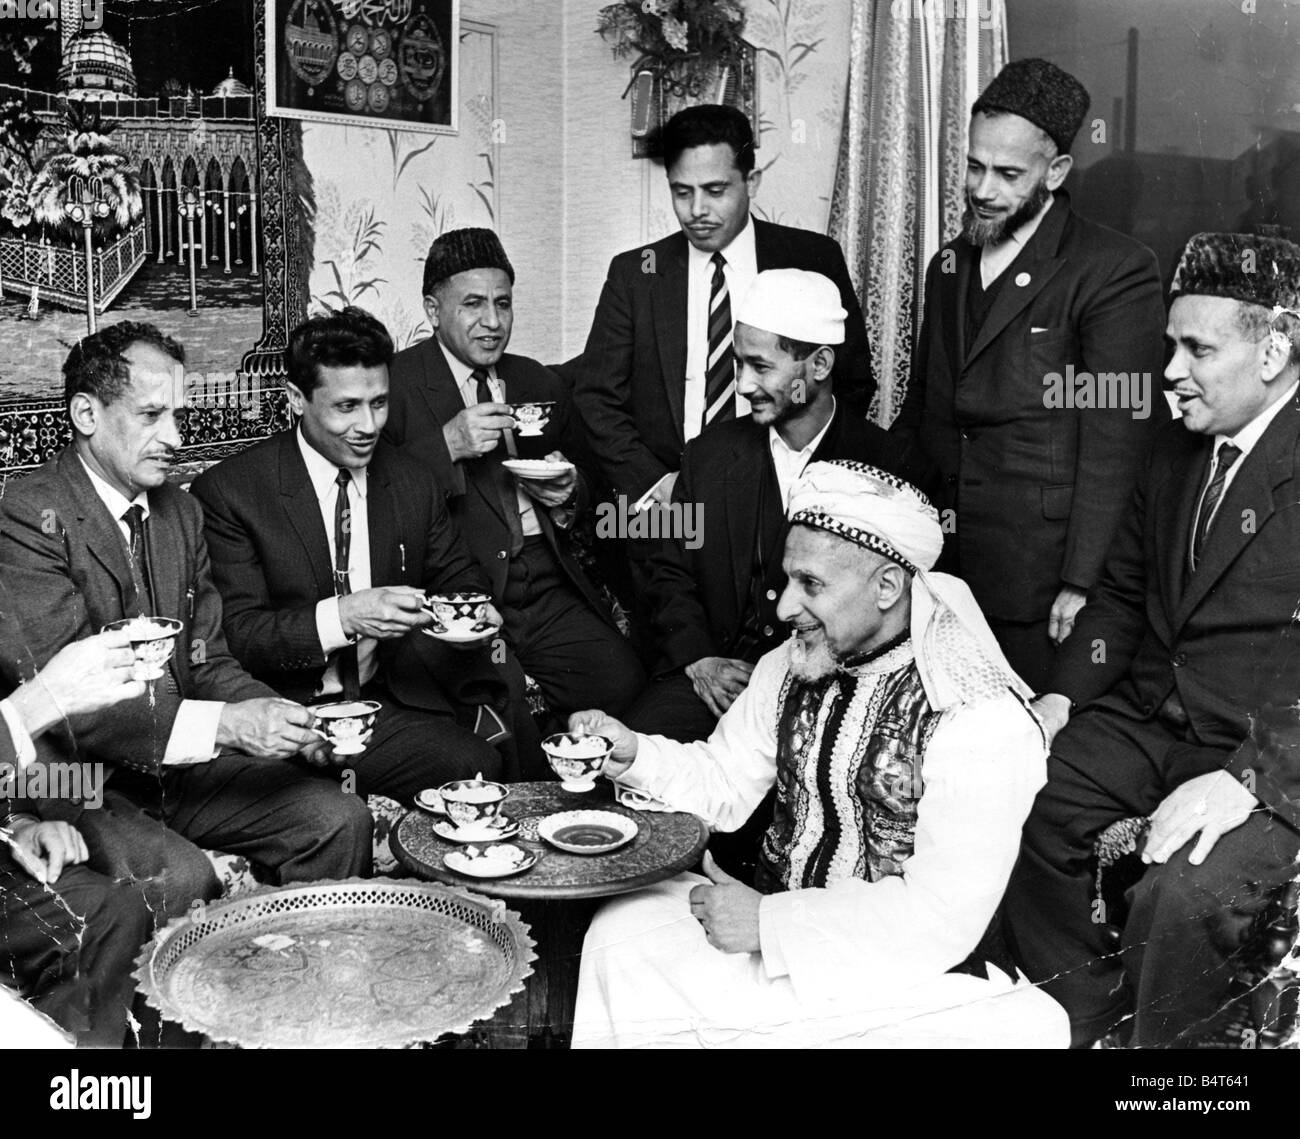 Moslems gather together at Loudon Square Cardiff before the feast of Ramadan Left to Right Amhed Hassan MohamedYafiy Hagid Mammon Mohamed Abdul Abdul Mishegeri Mohamed Ali and Mohamed Mthar In the front in national costume is Hag Salah December 1969 Stock Photo